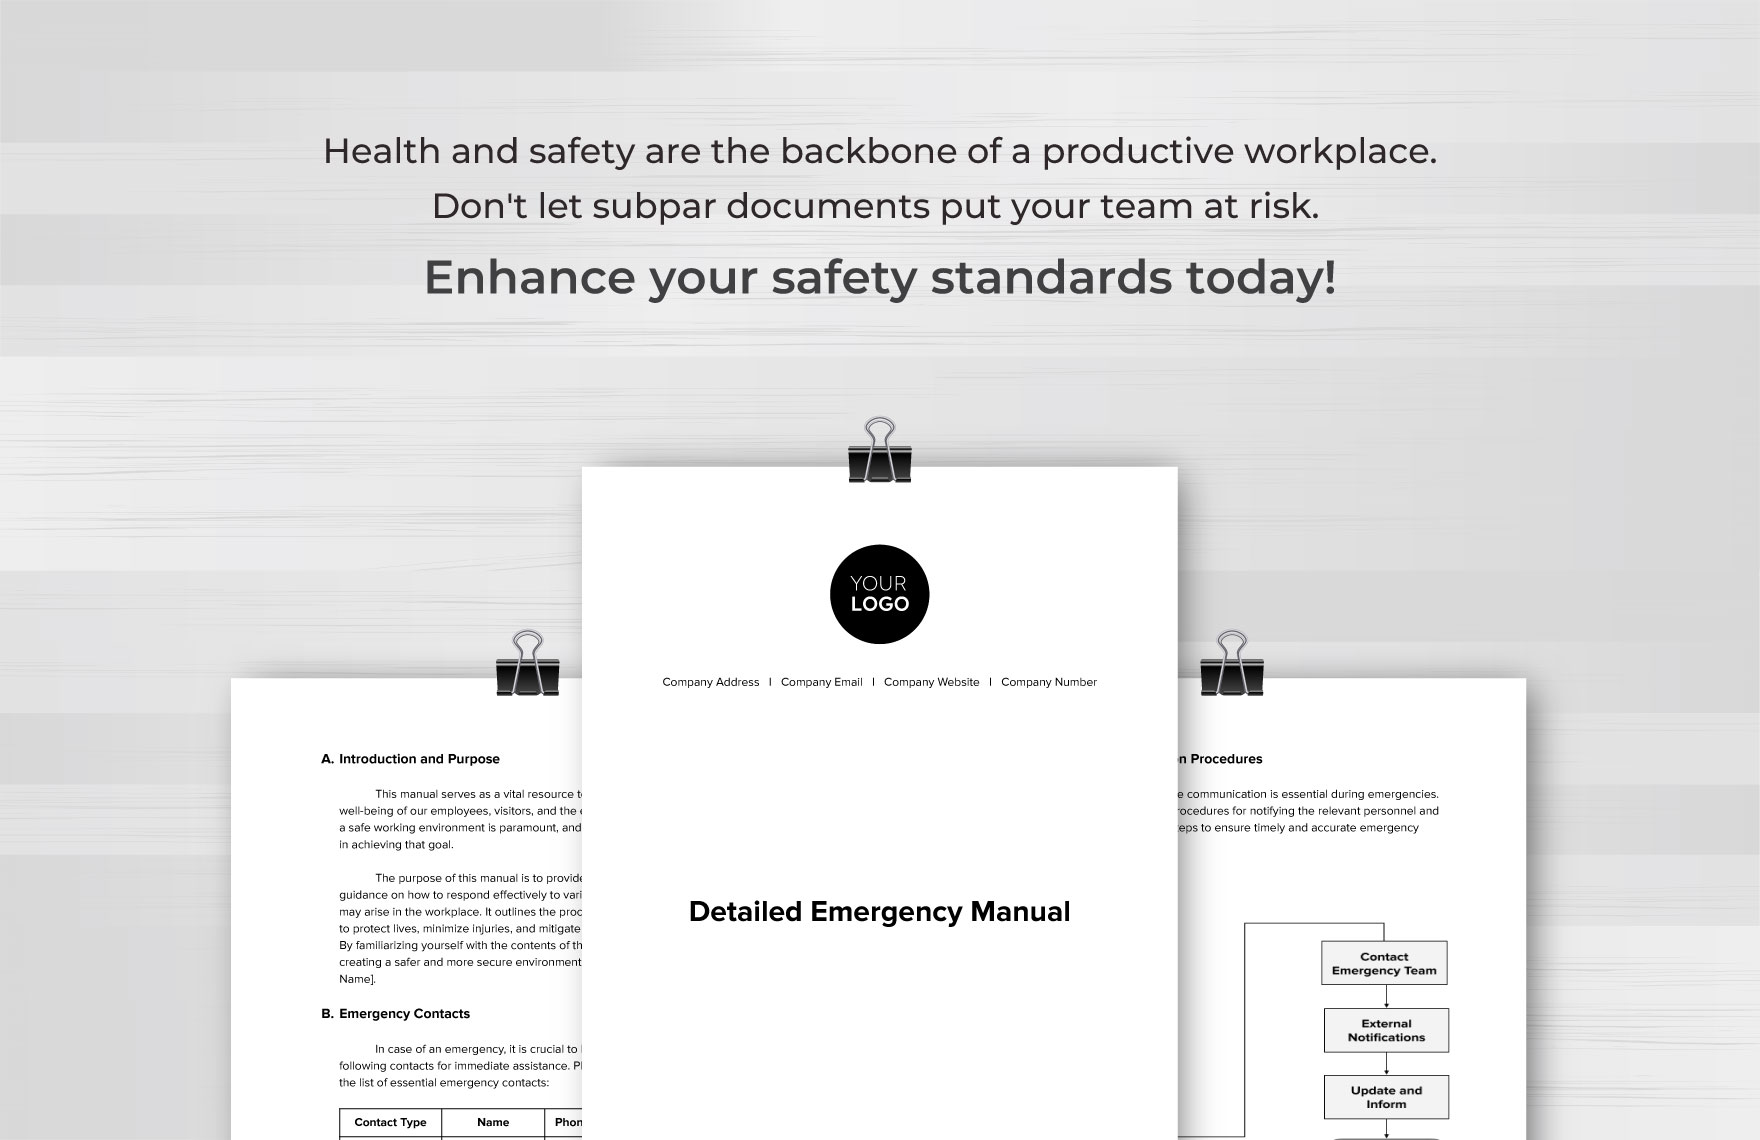 Detailed Emergency Manual Template